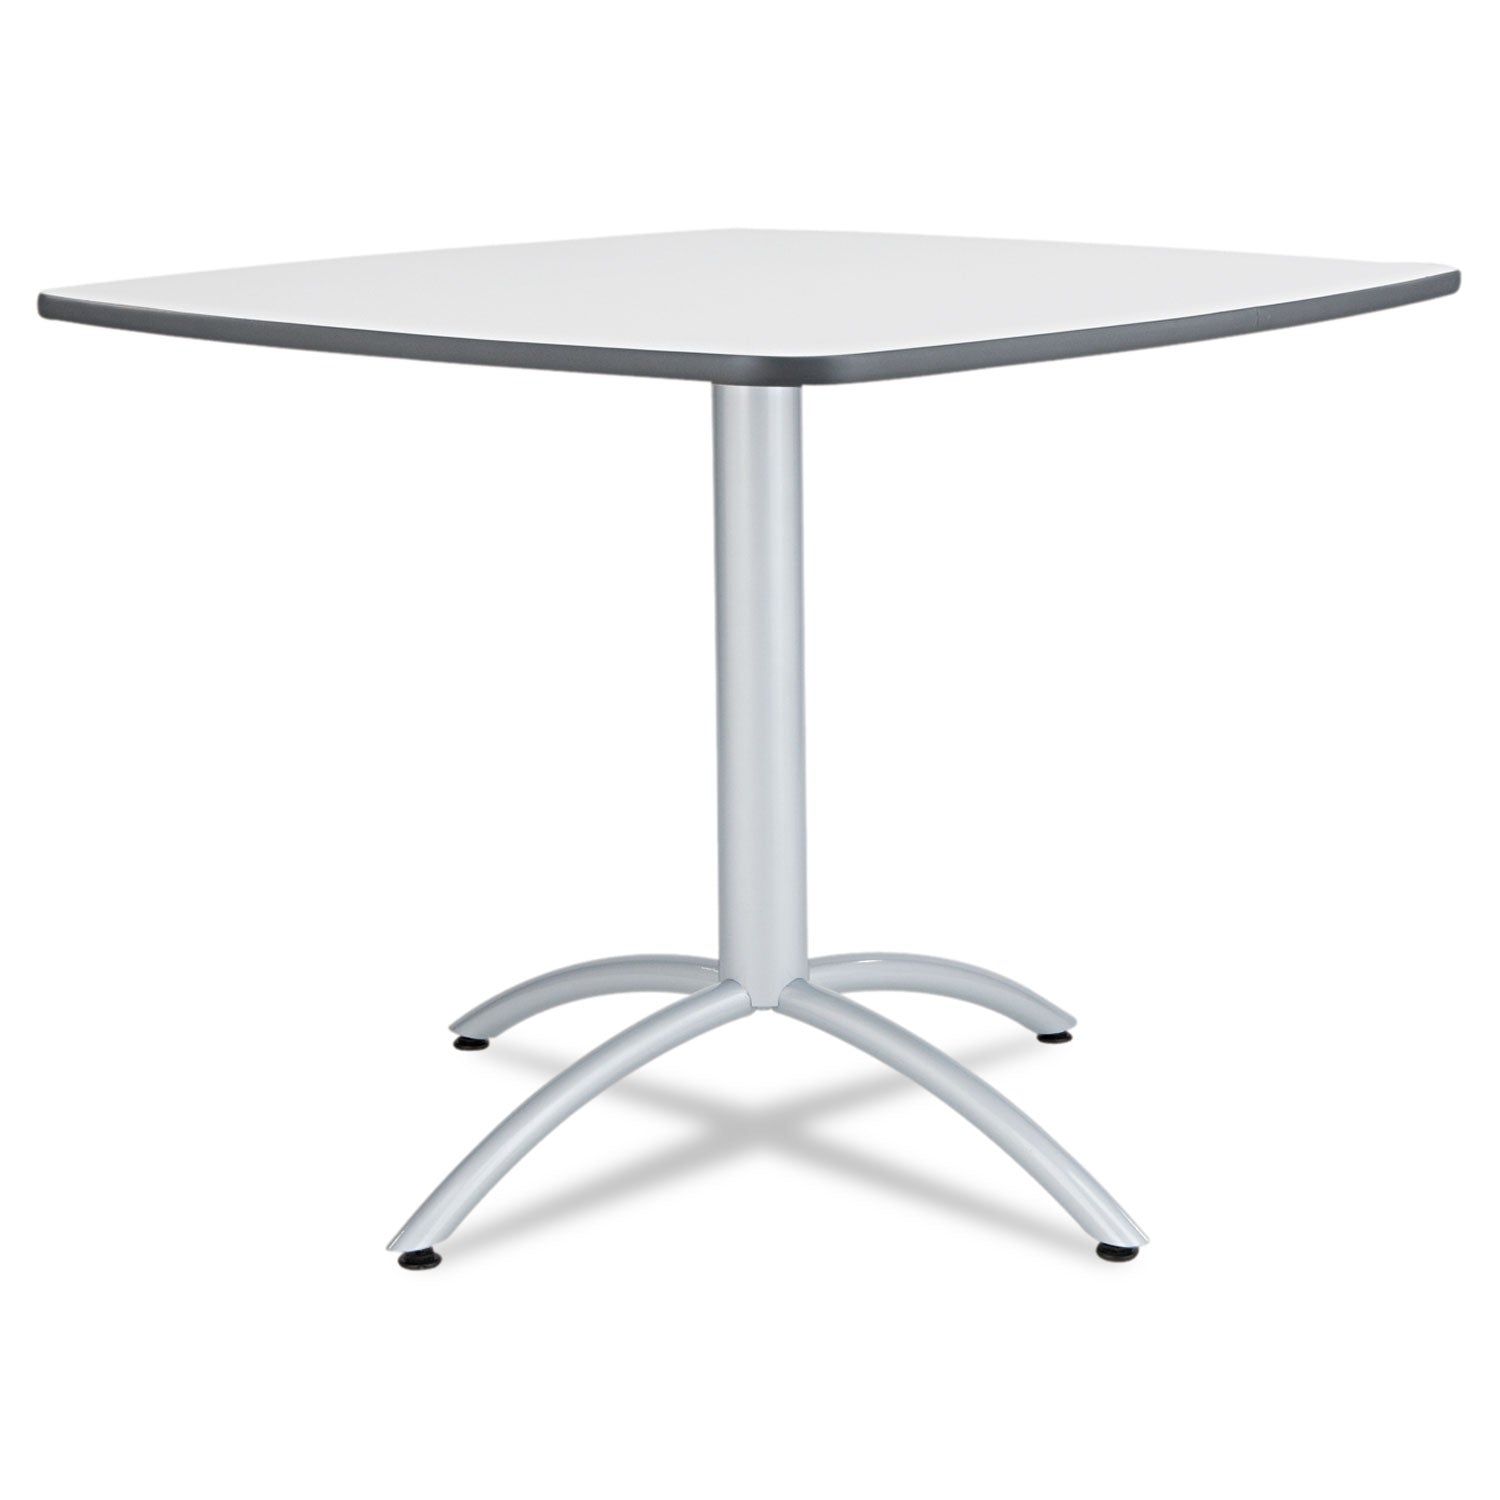 CafeWorks Cafe-Height Table, Square, 36" x 36" x 30", Gray/Silver - 